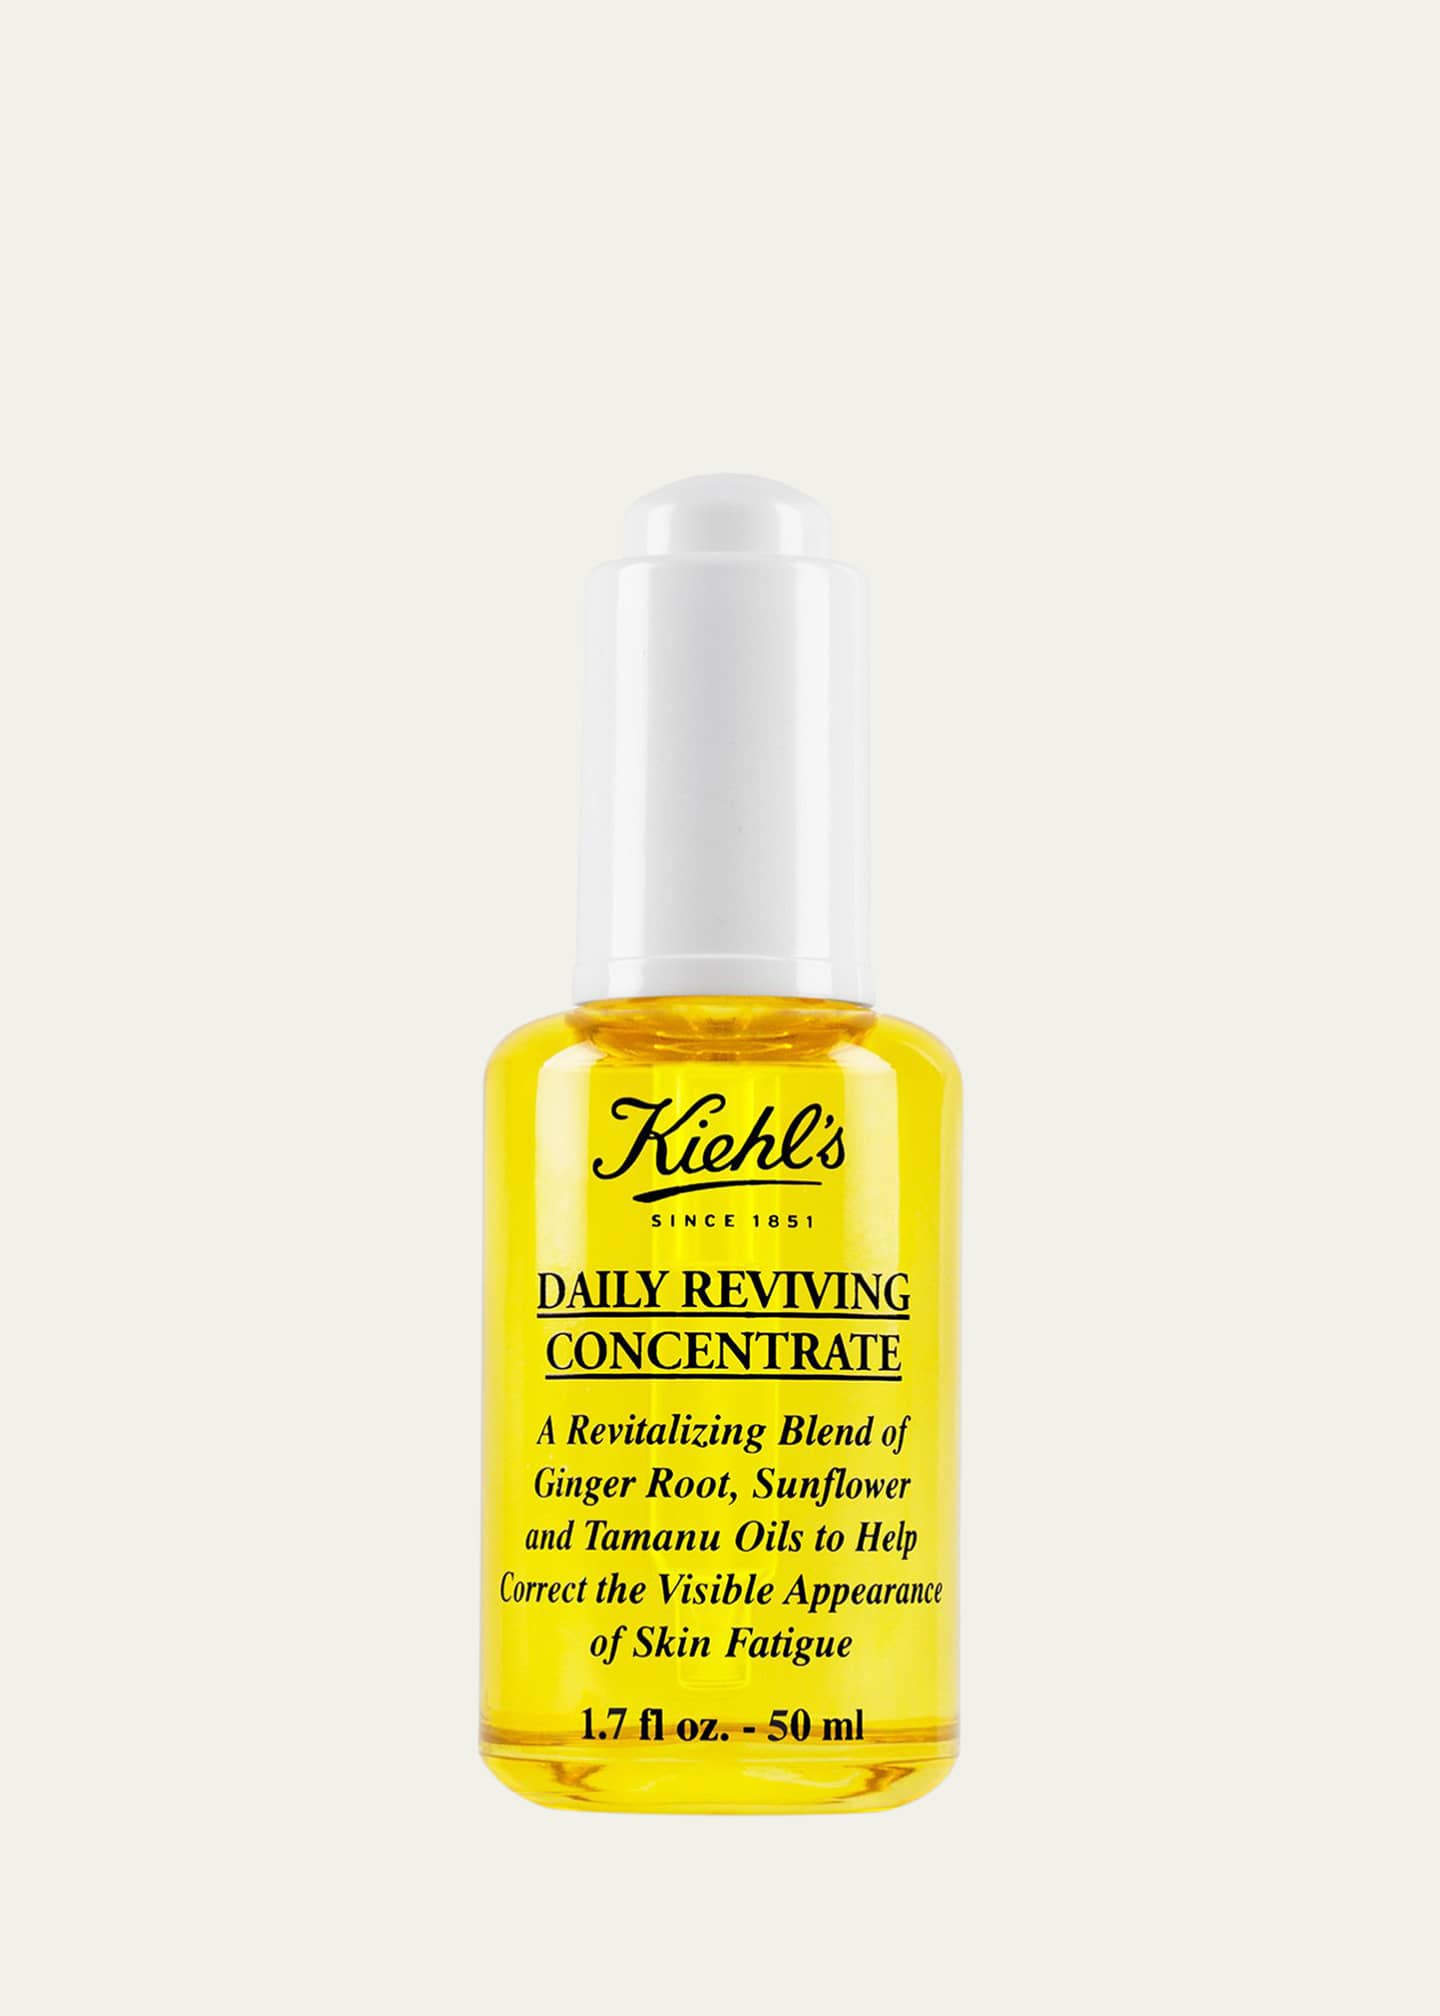 Kiehl's Since 1851 Daily Reviving Concentrate, 1.7 oz. Image 1 of 5